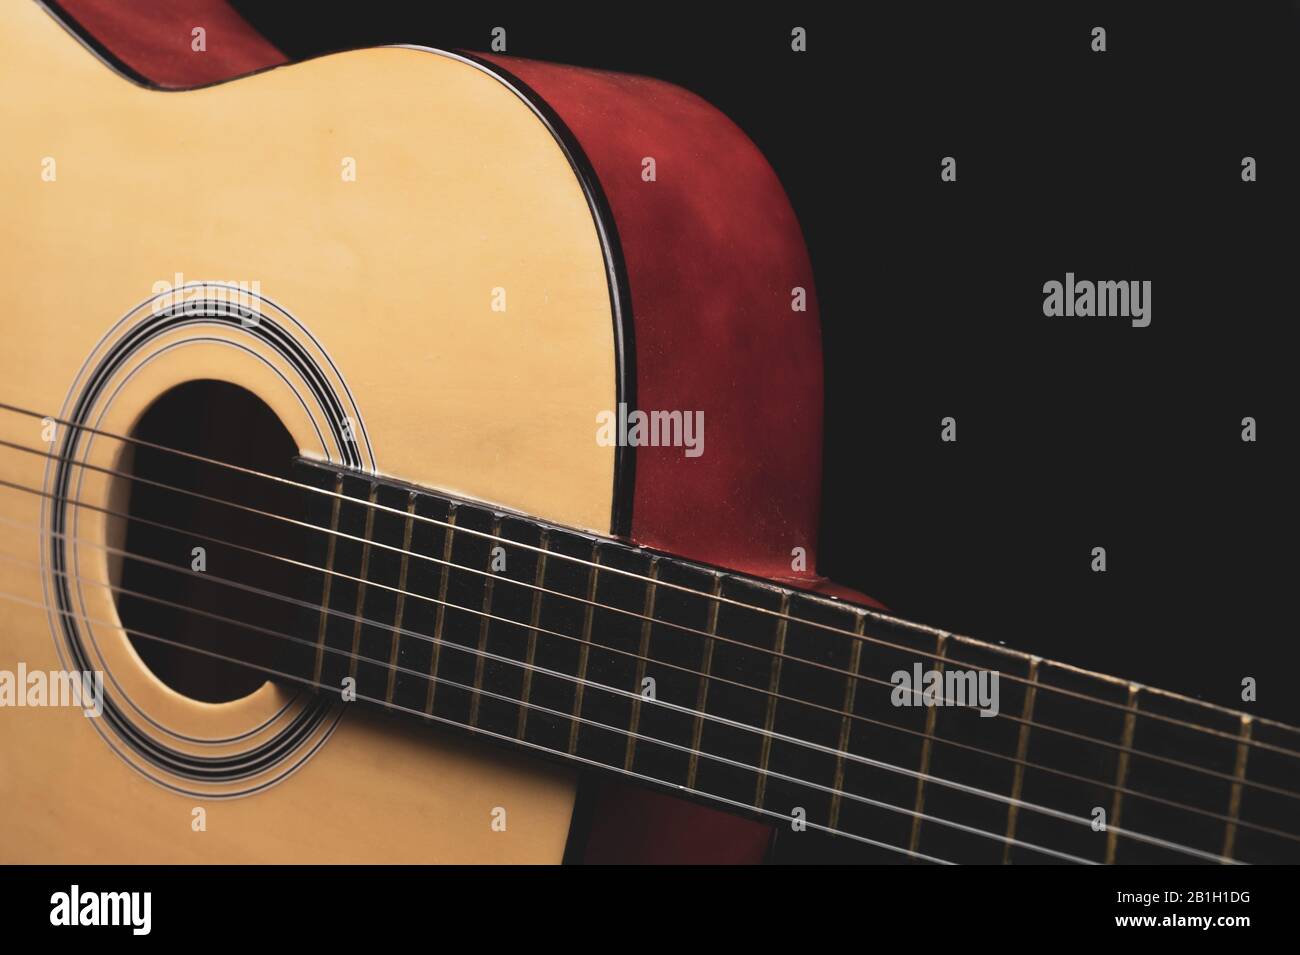 Guitar on the black background. acoustic musical instrument Stock Photo